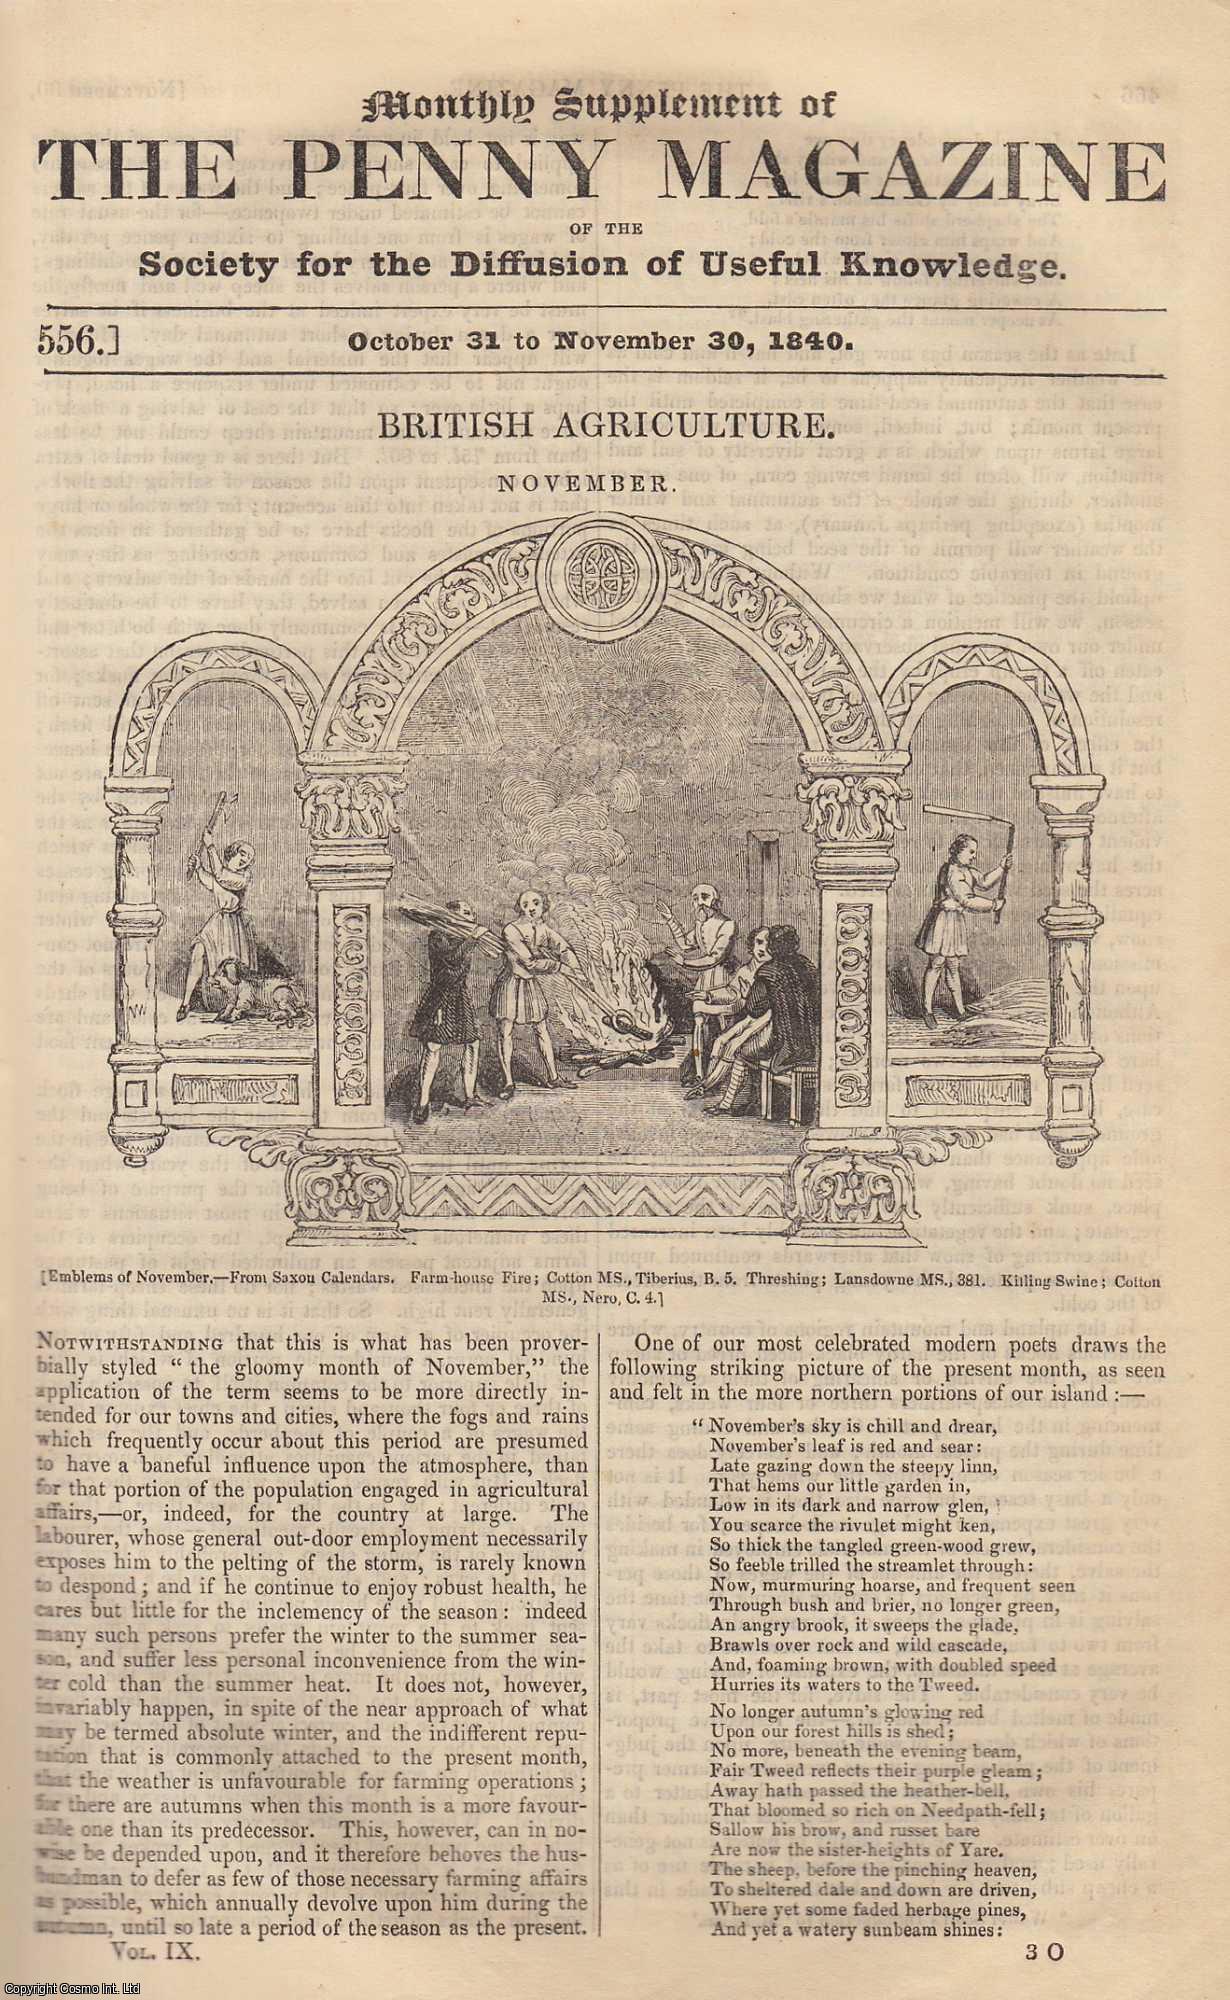 --- - British Agriculture (November). Issue No. 556, October 31st, 1840. A complete rare weekly issue of the Penny Magazine, 1840.